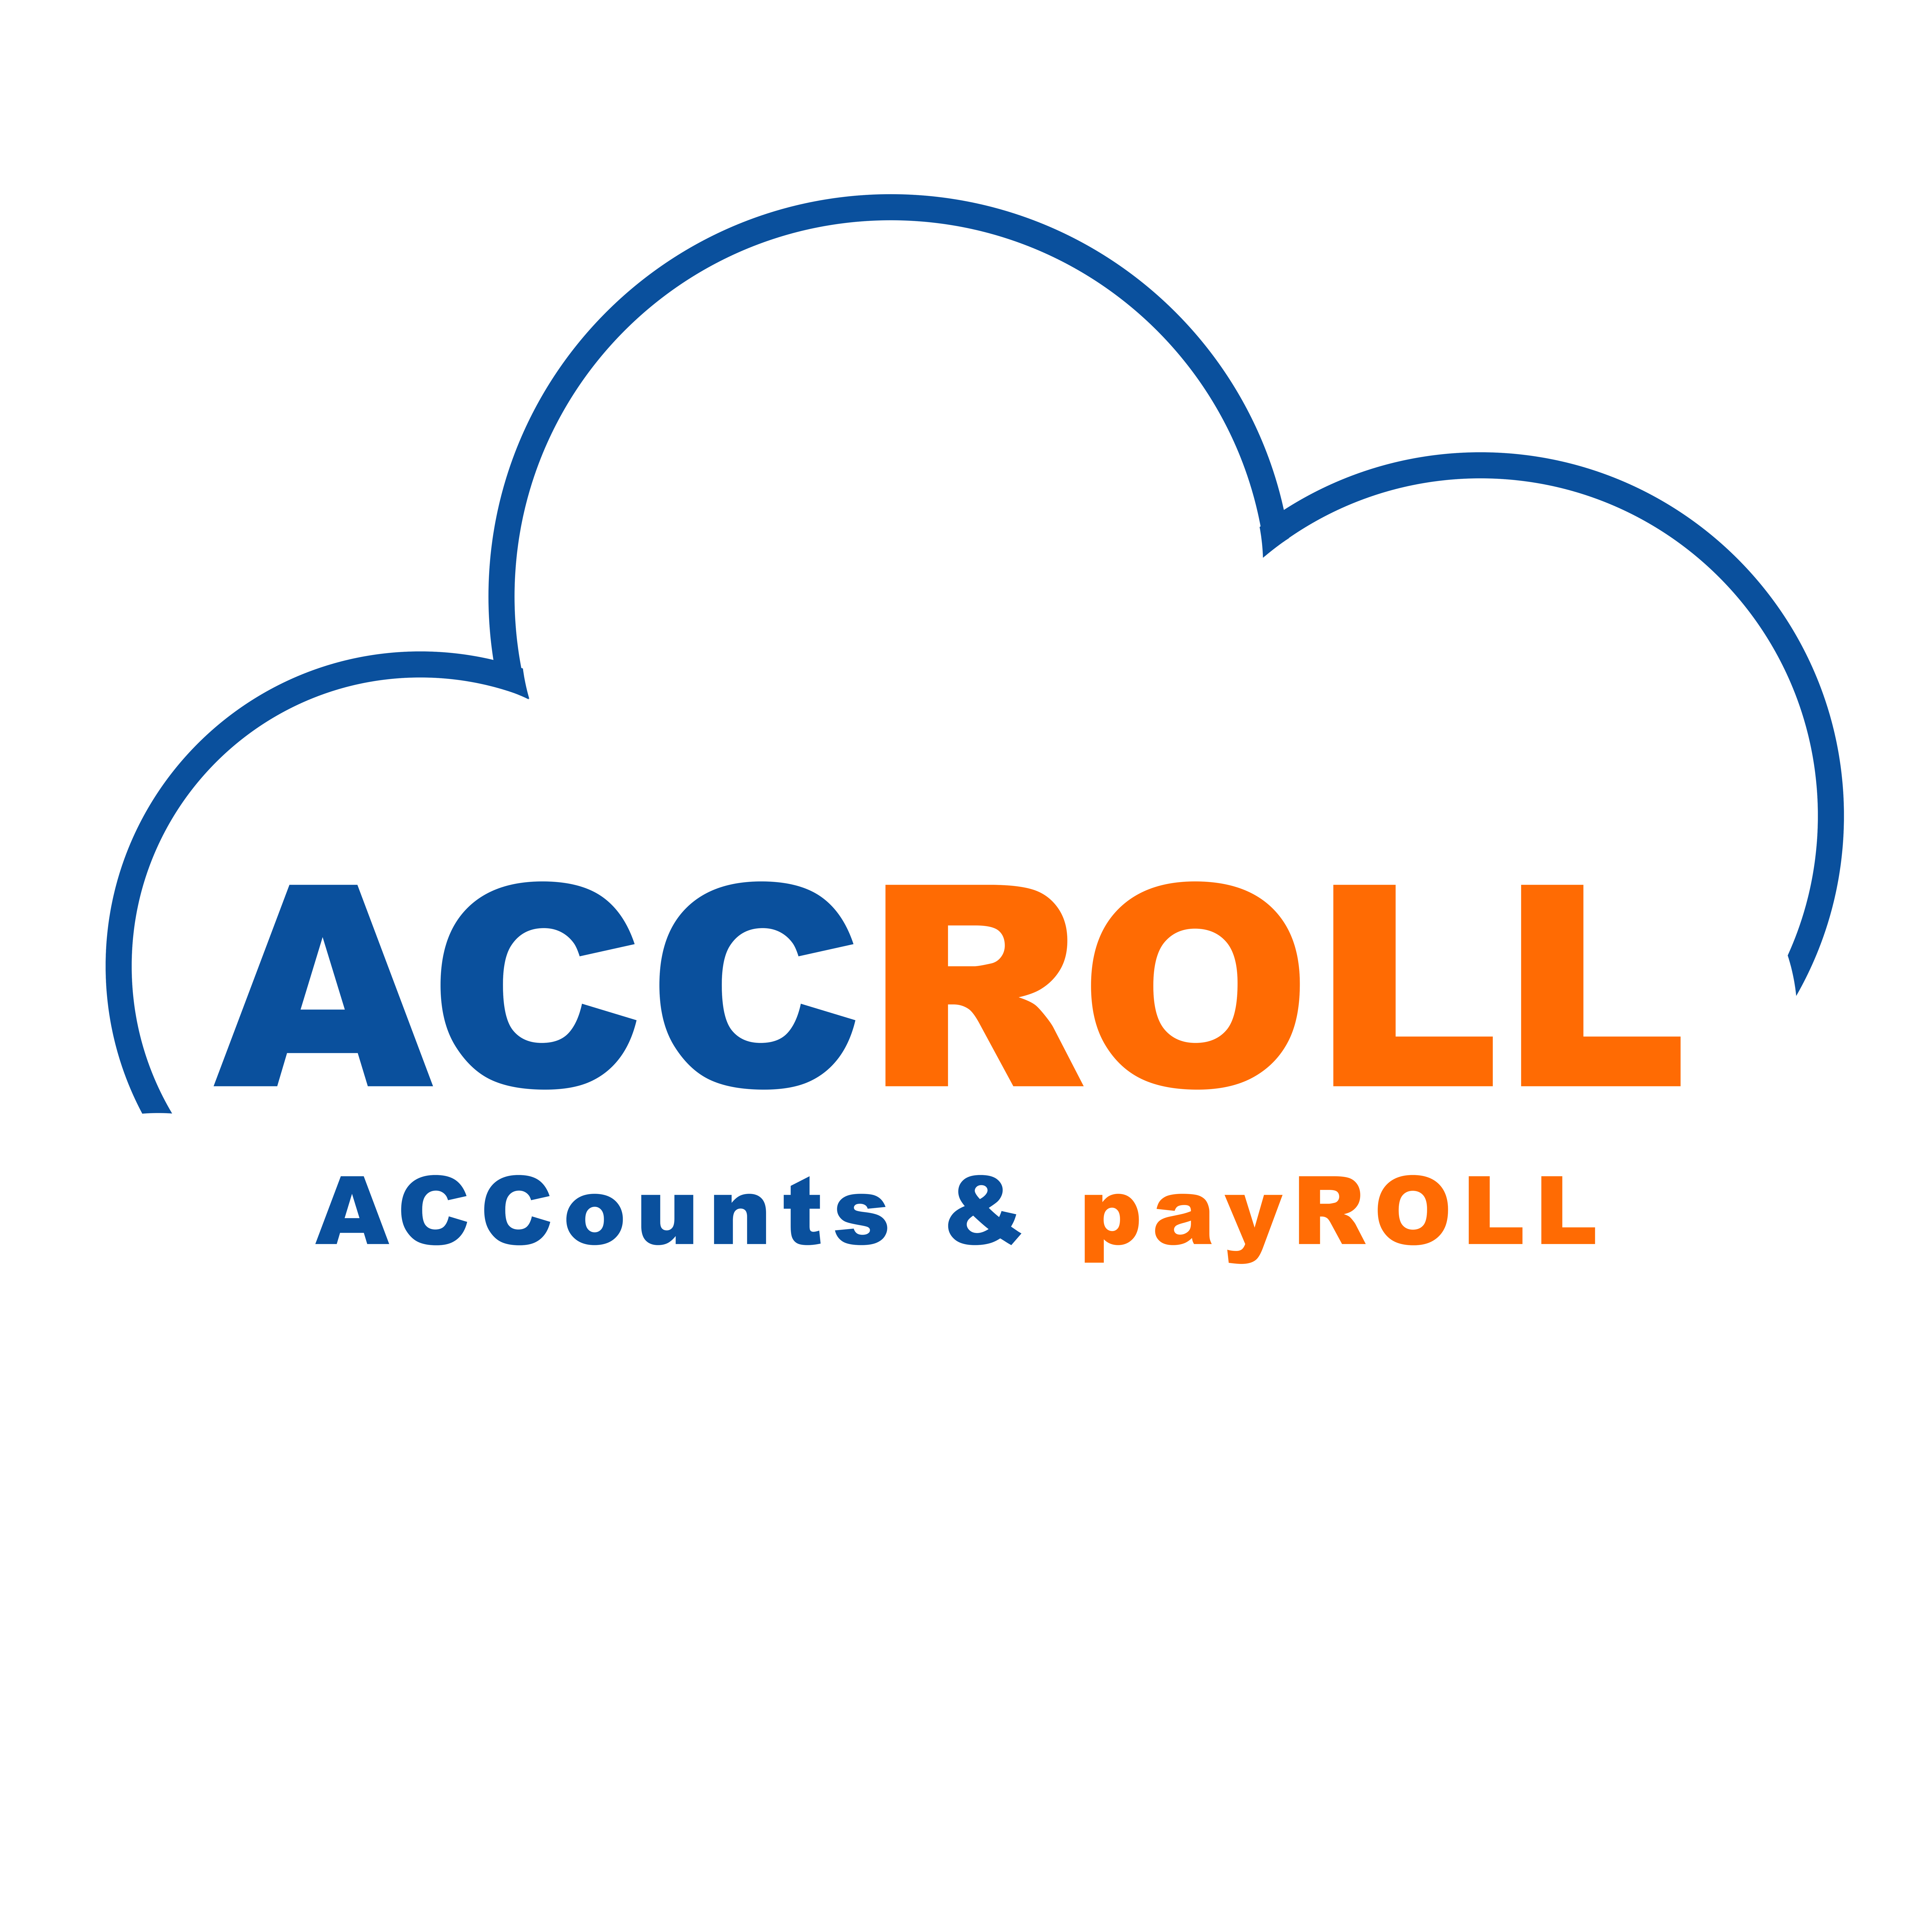 Accroll